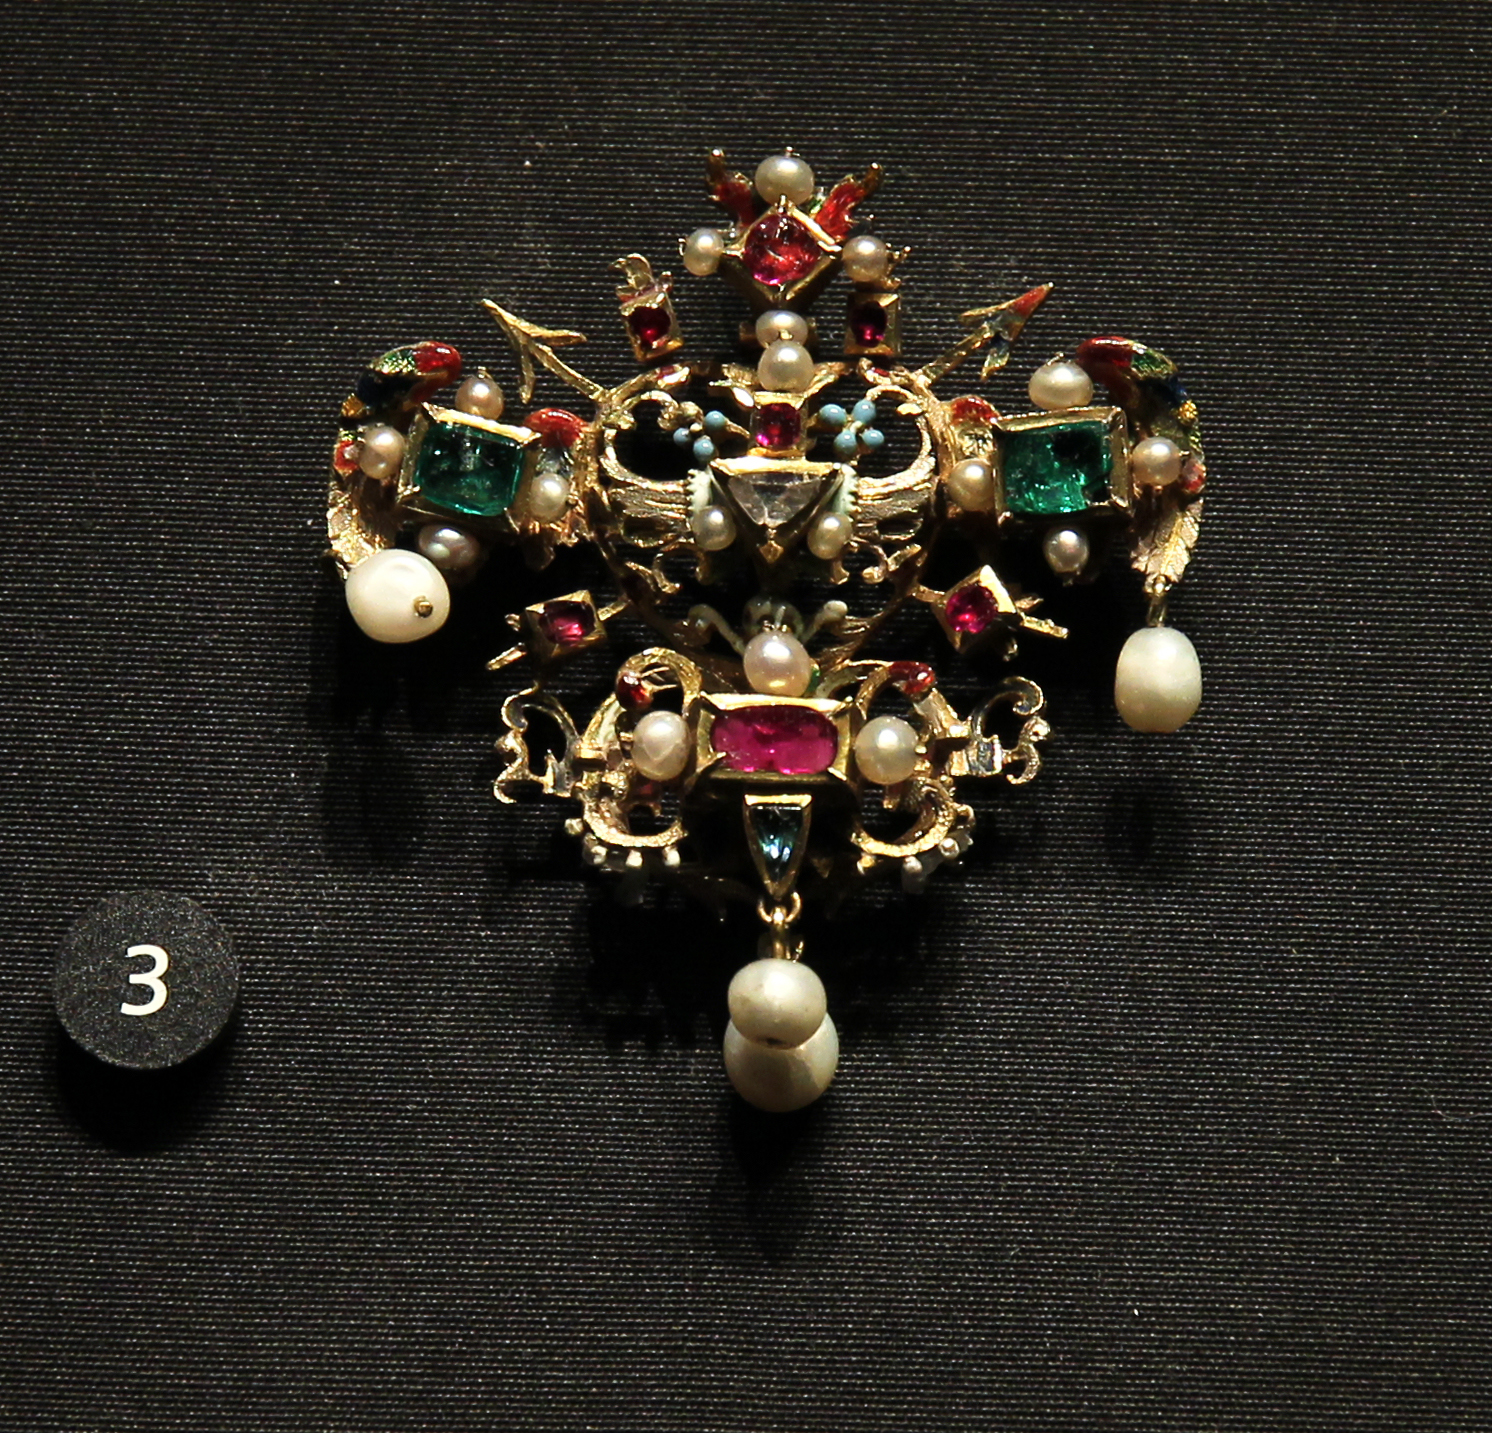 File:Victoria and Albert Museum Jewellery 11042019 Chain Gold